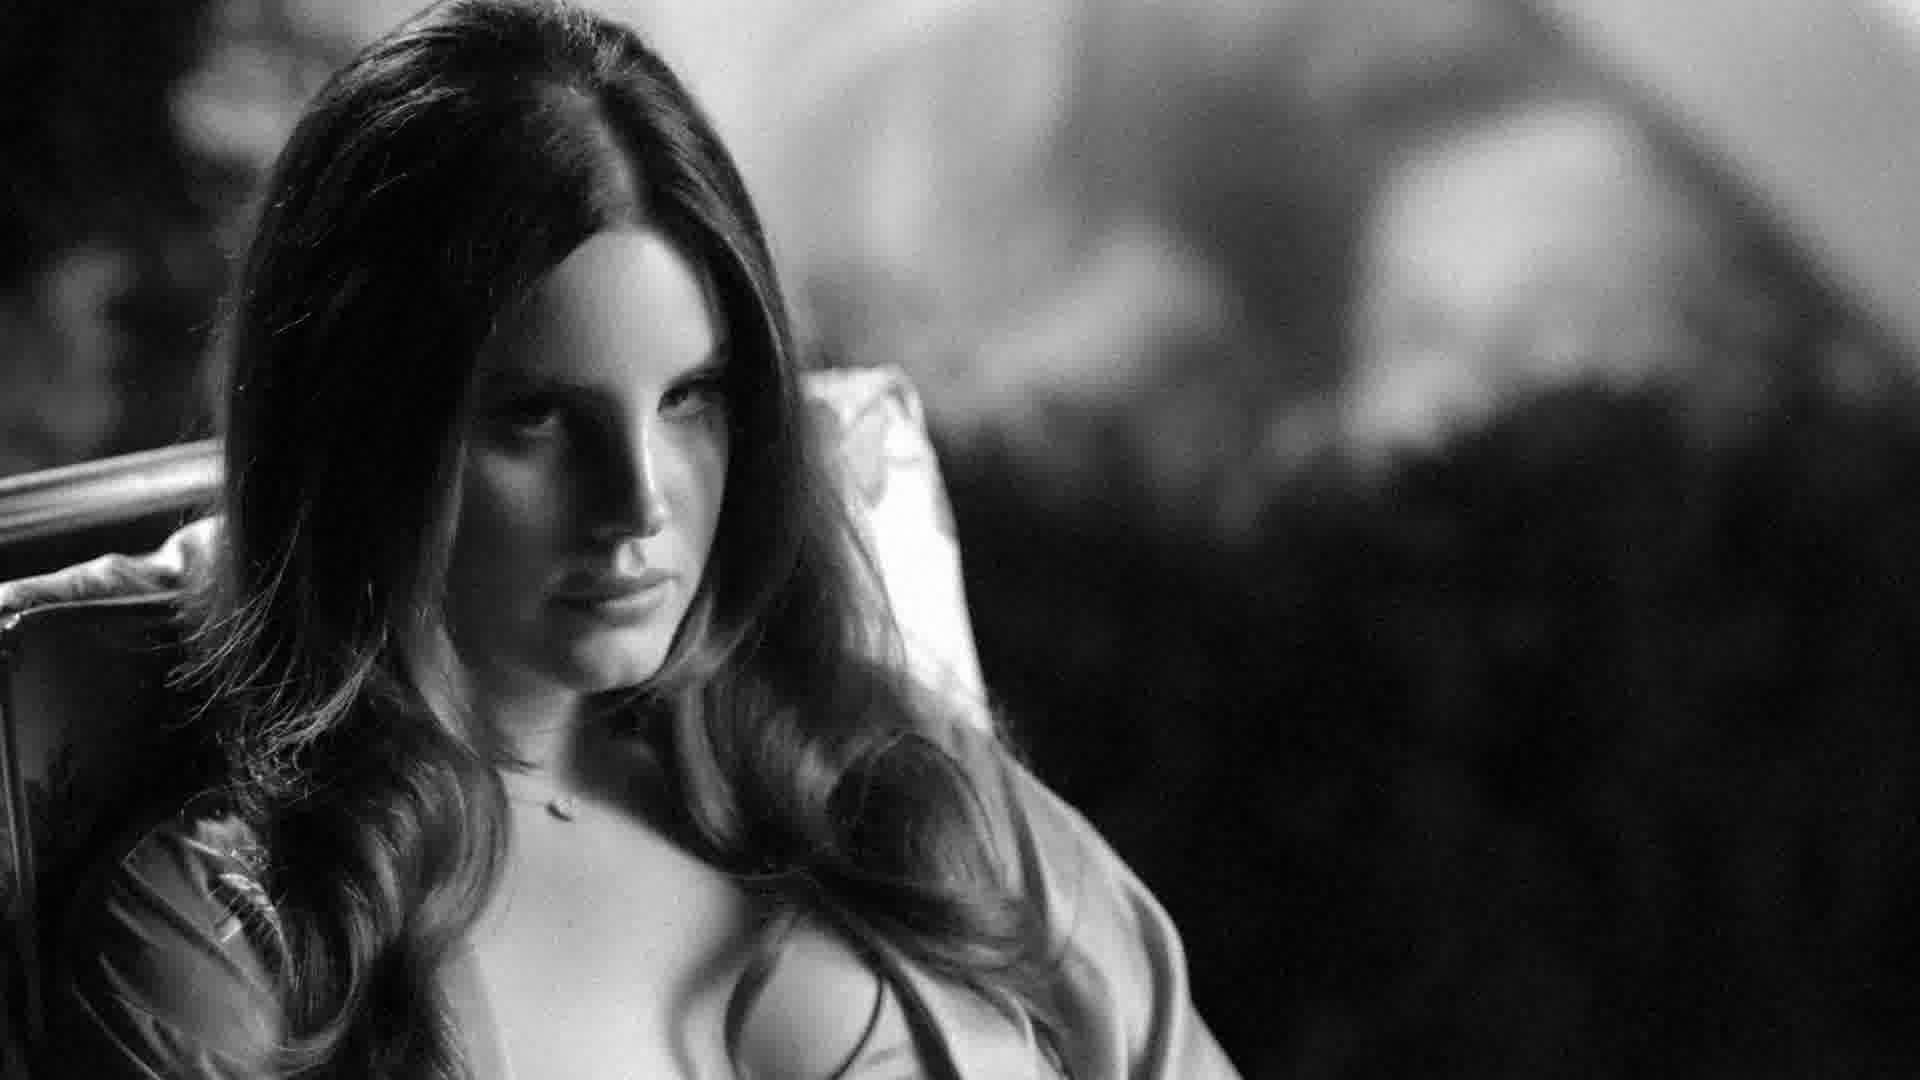 Lana Del Rey. Biography, News, Photo and Videos